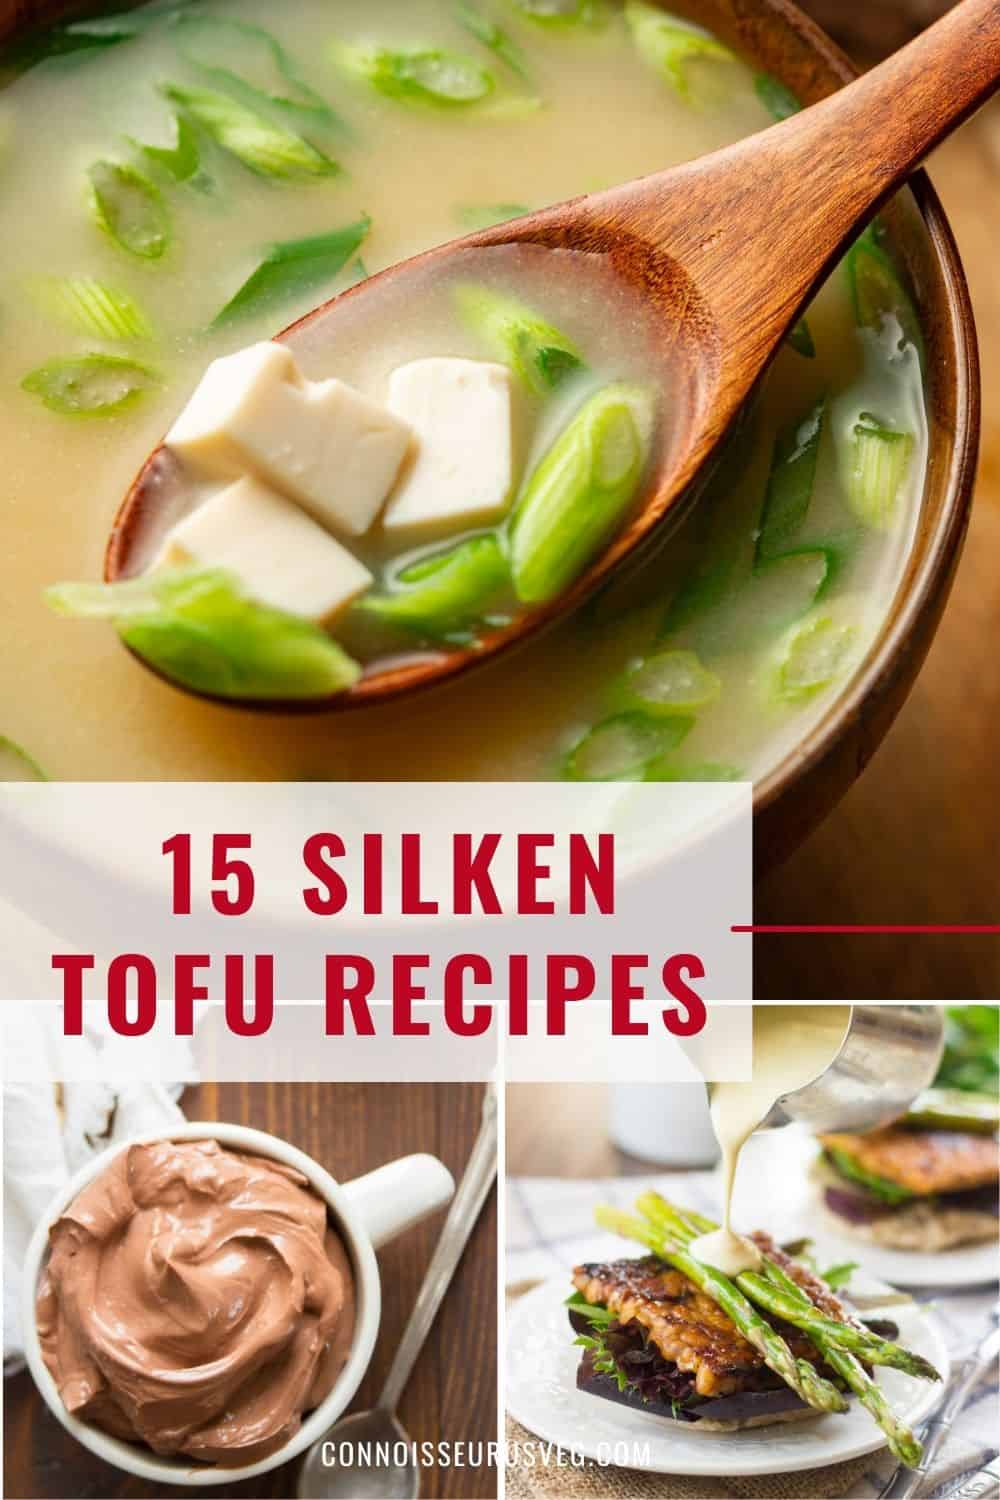 Graphic showing photos of food with text reading "15 silken tofu recipes."